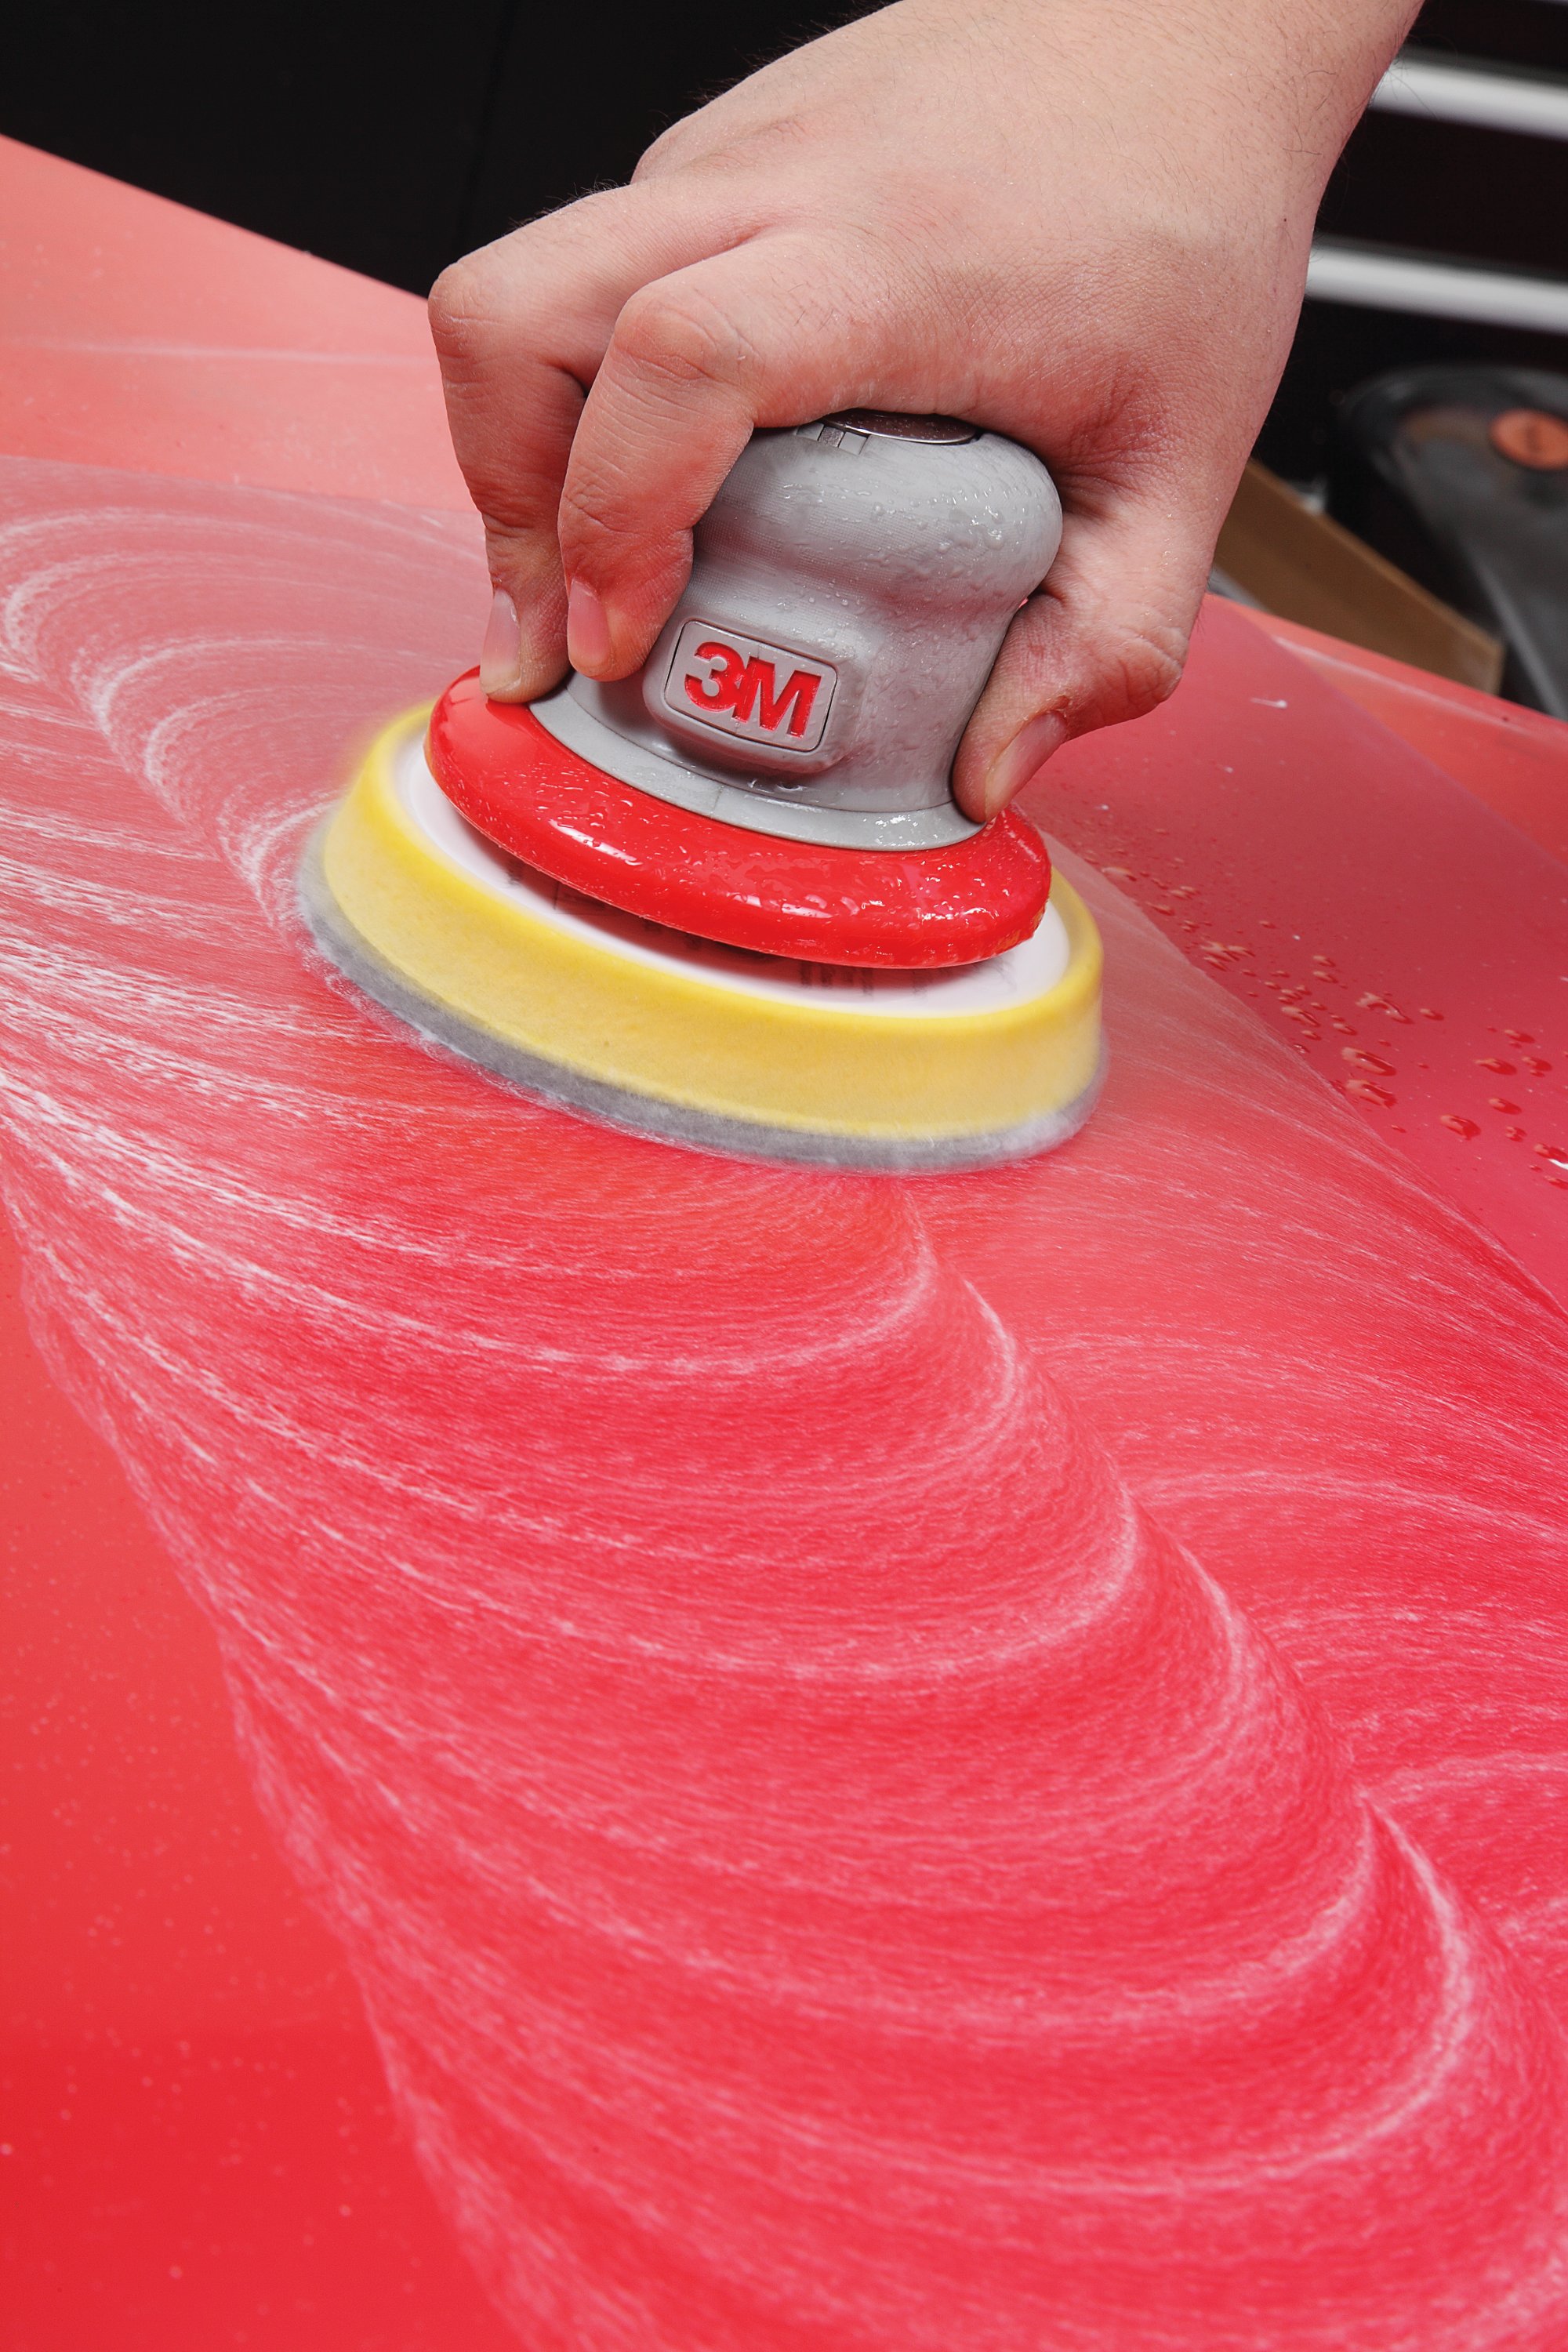 3M™ Finesse-it™ Polish K211 is water-based and does not contain silicones.